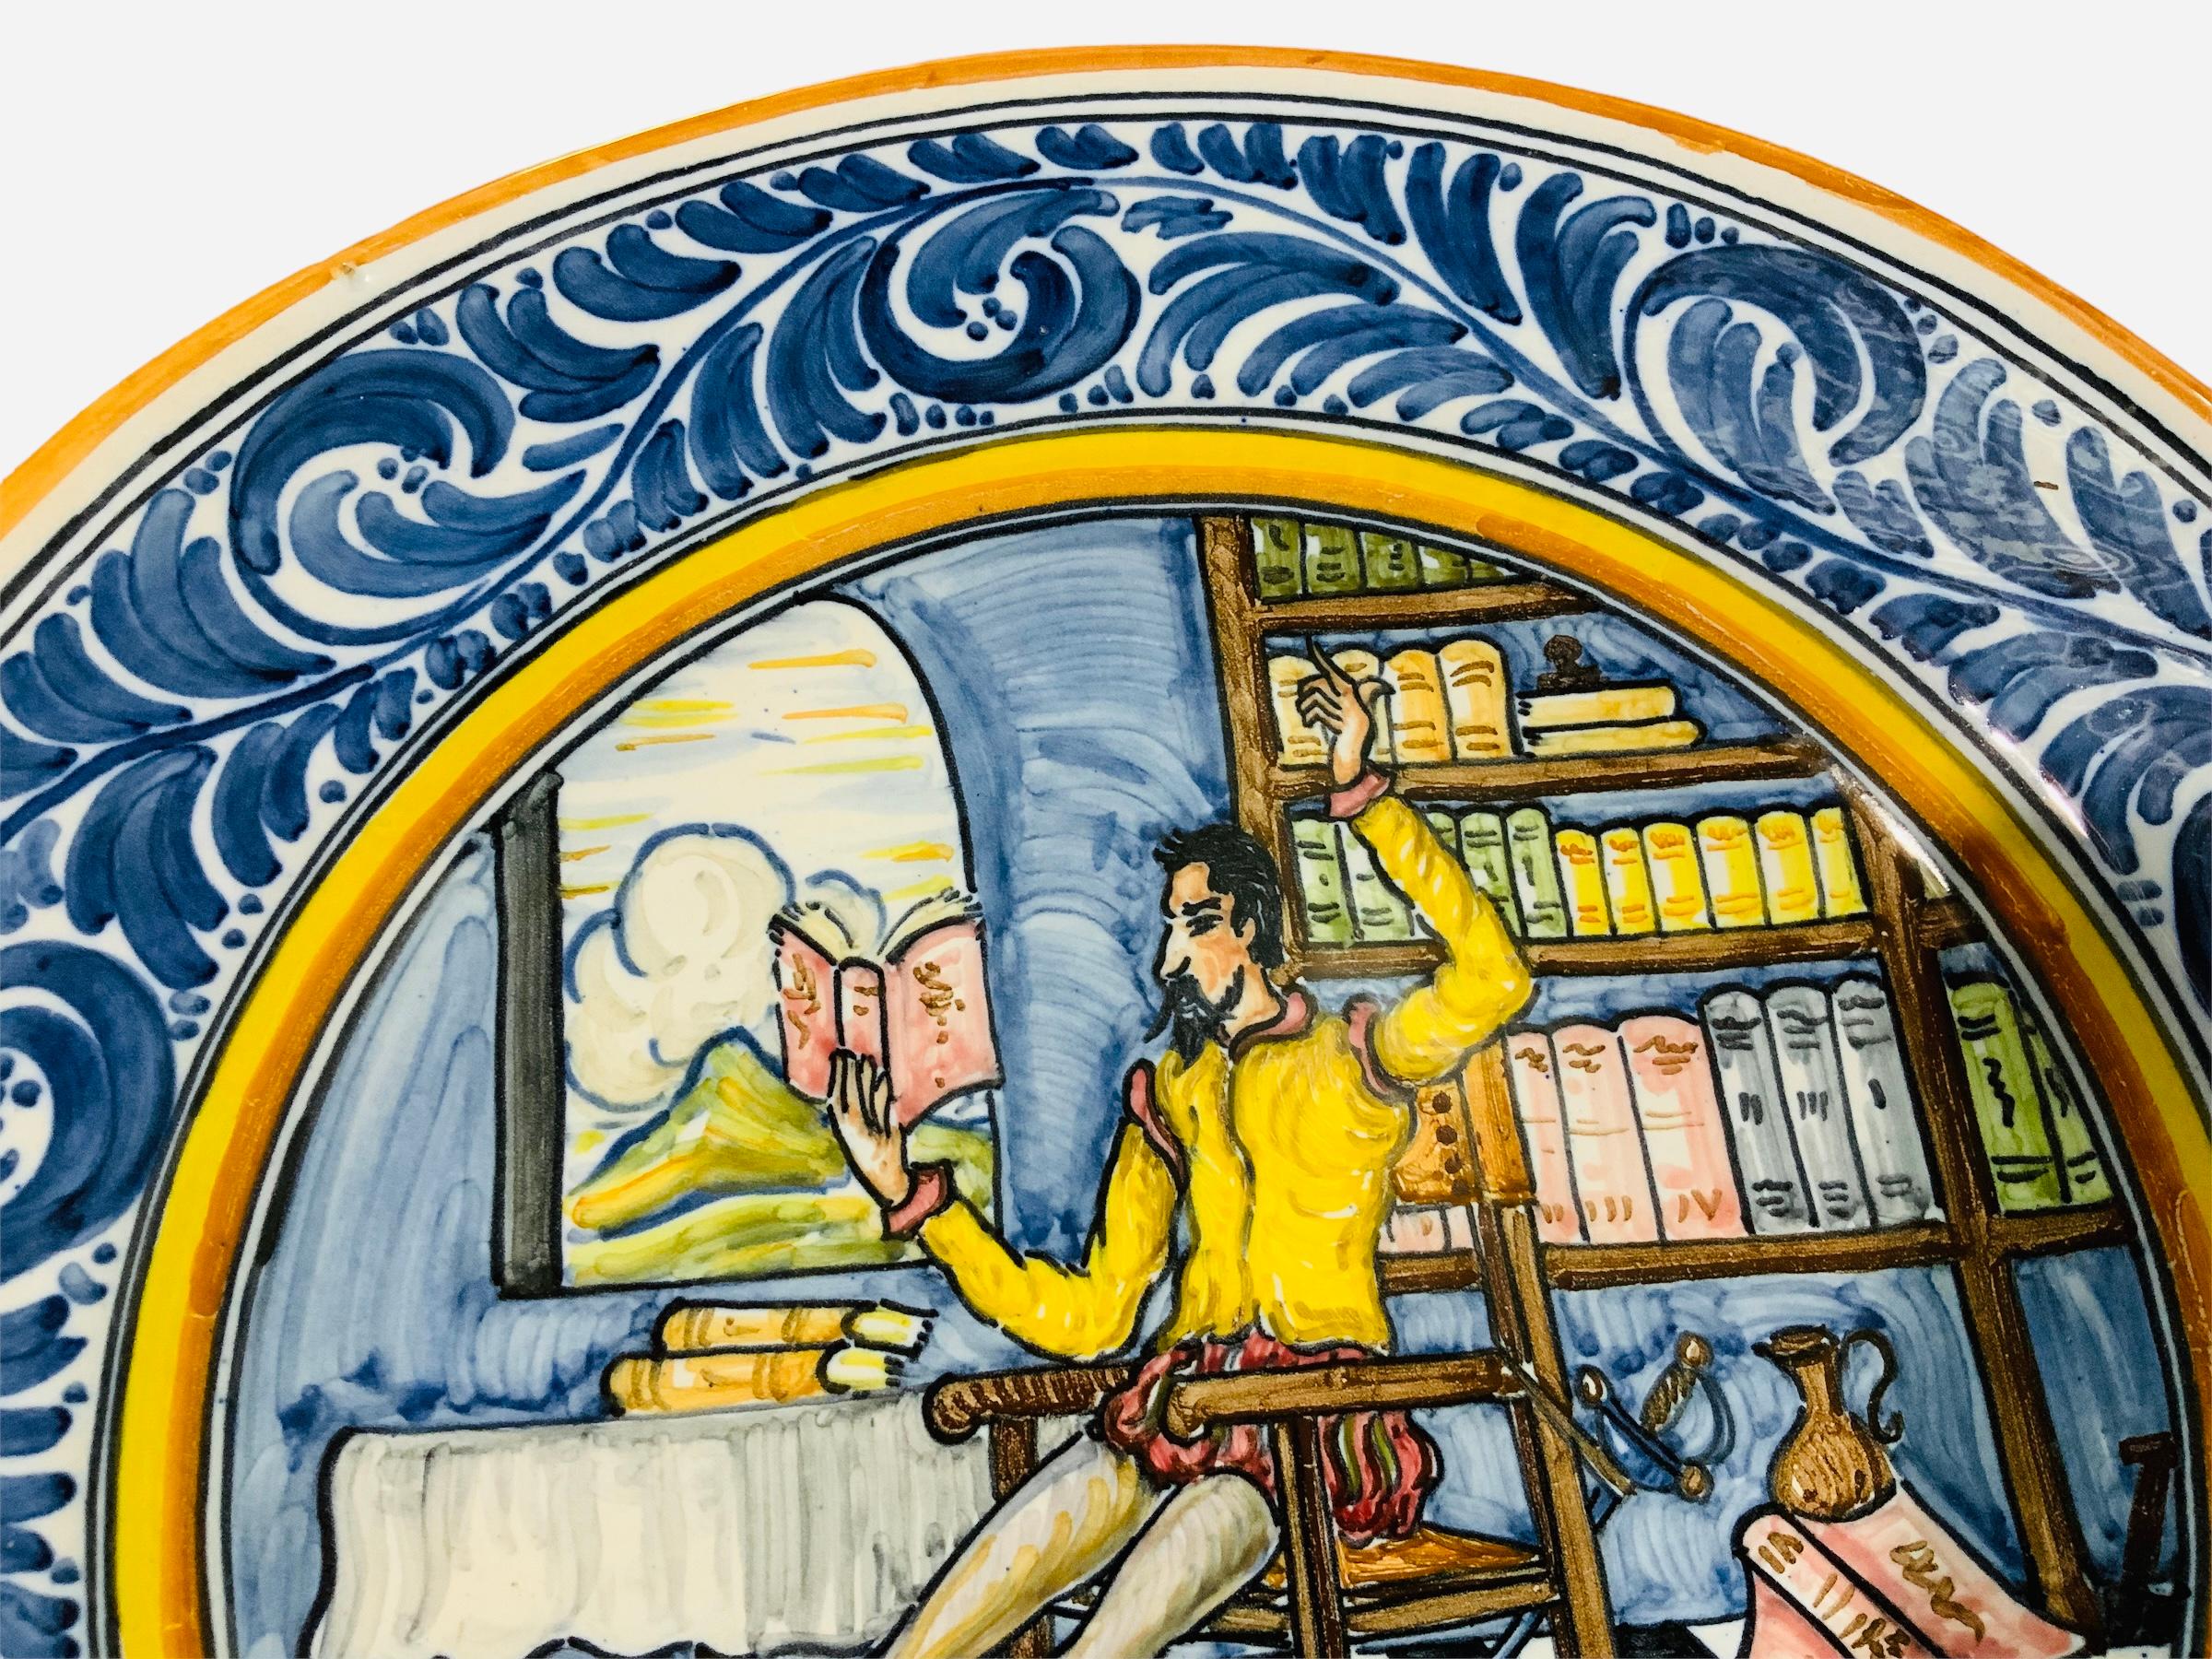 This is a very large decorating Majolica Plate depicting Don Quixote de La Mancha. These famous character is universally known by the Spanish novel book of Miguel de Cervantes (One of the greatest novel written and the second most translated book in